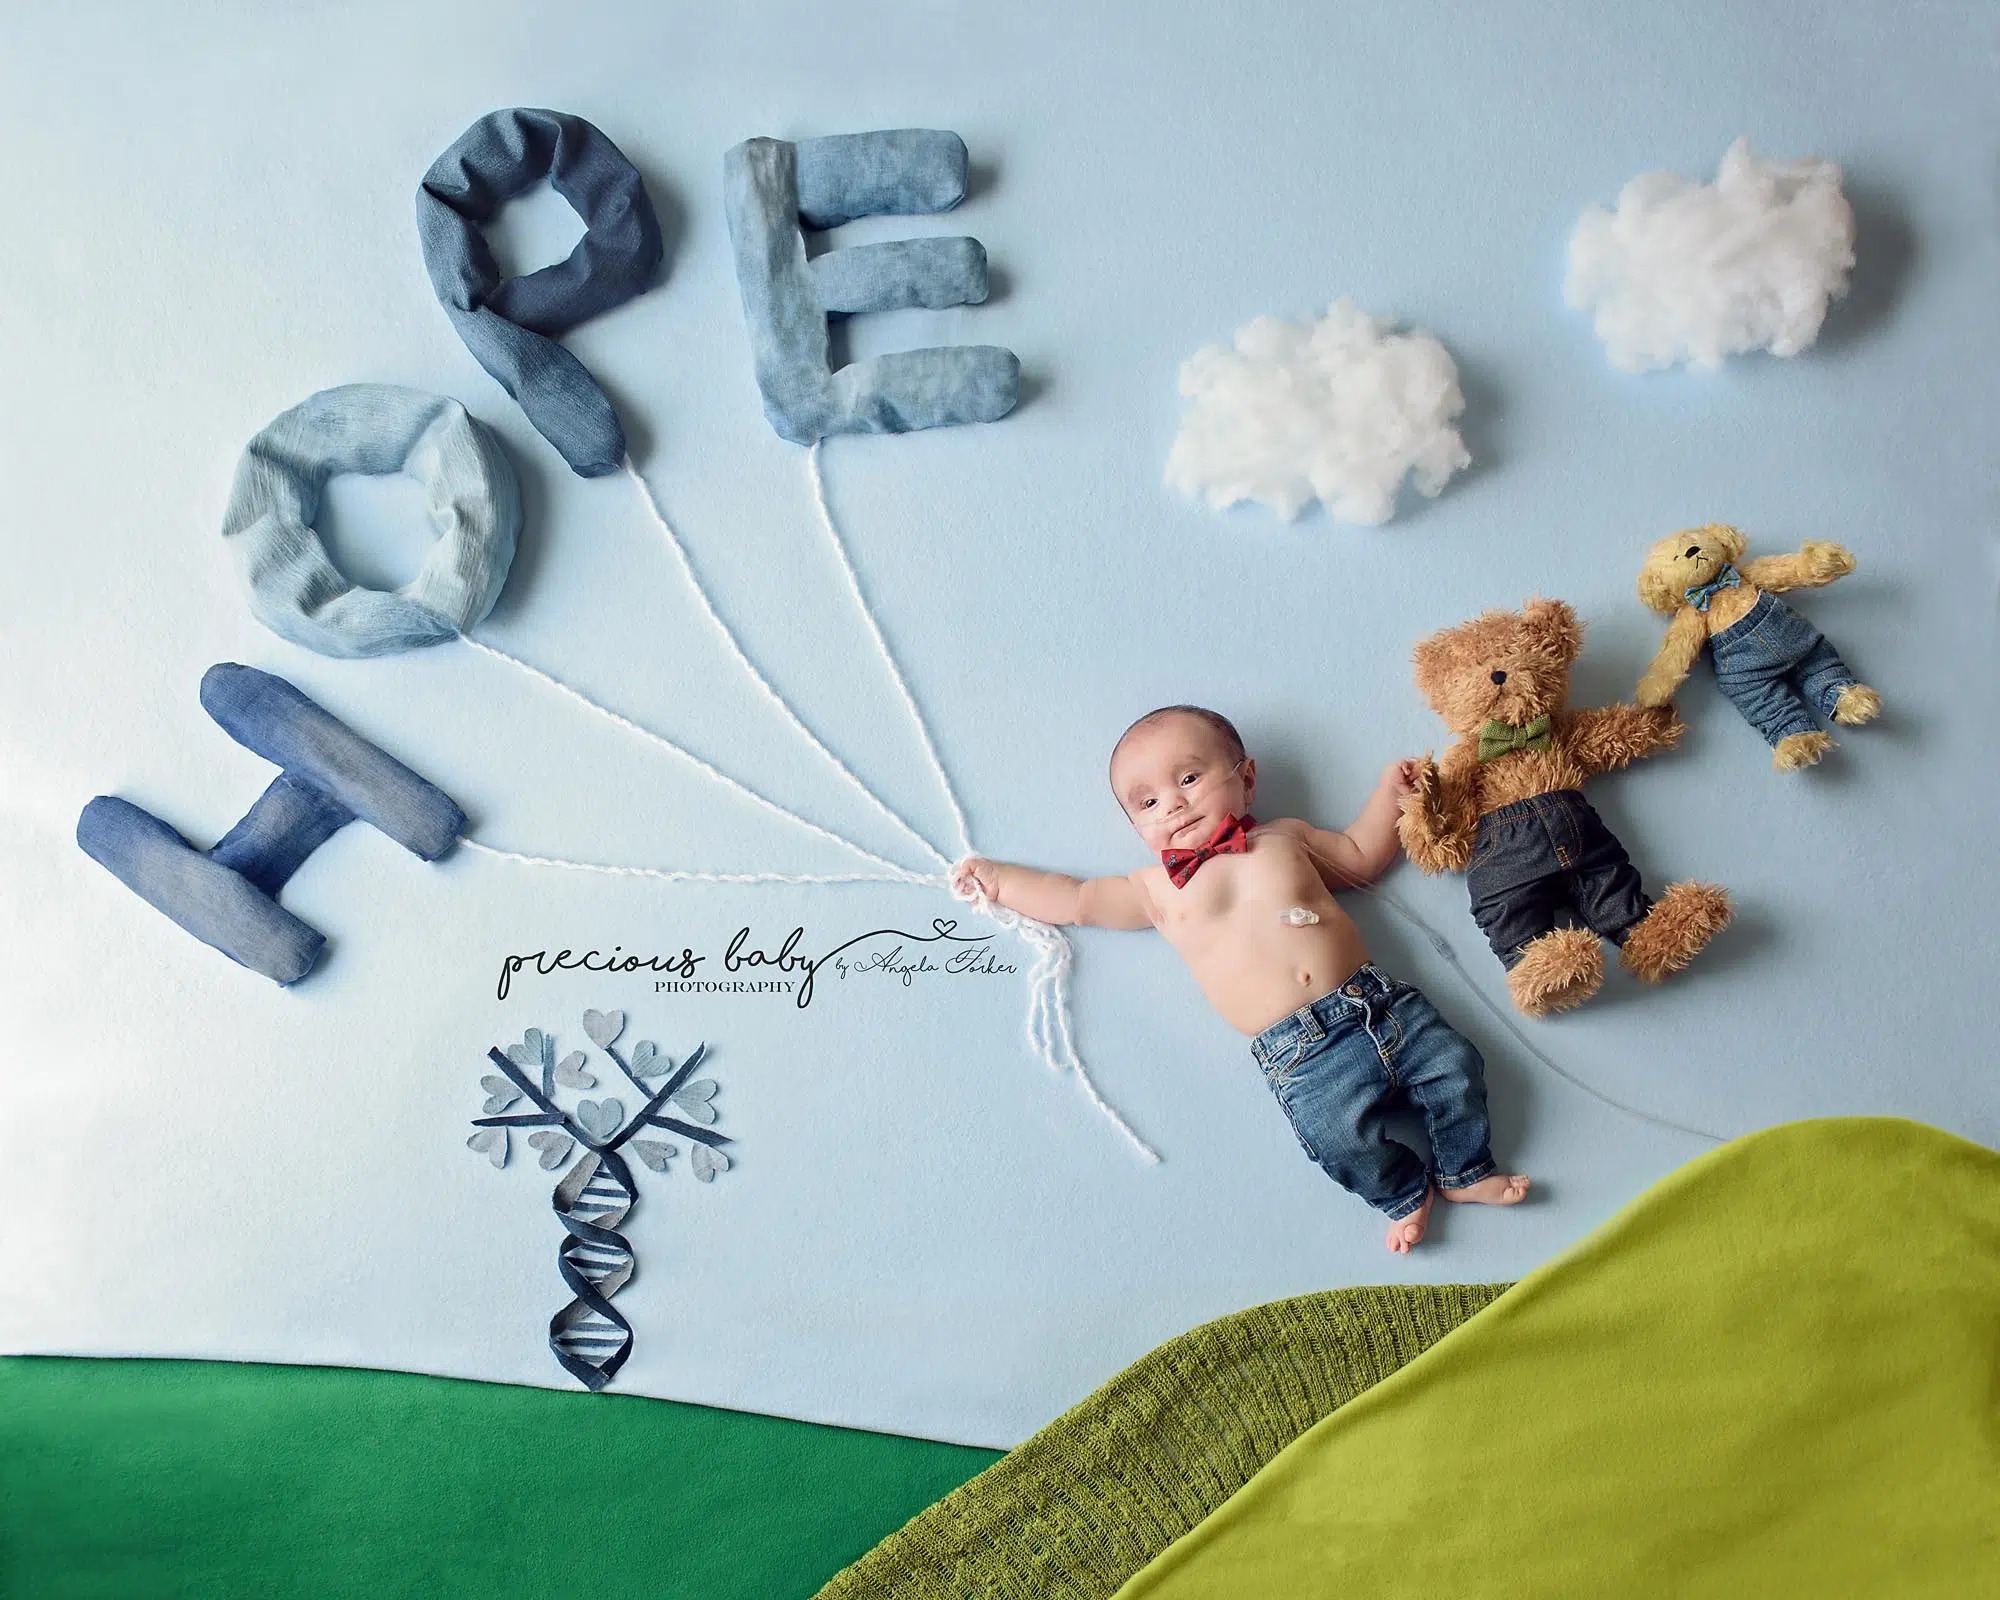 Angela Forker - The Precious Baby Project